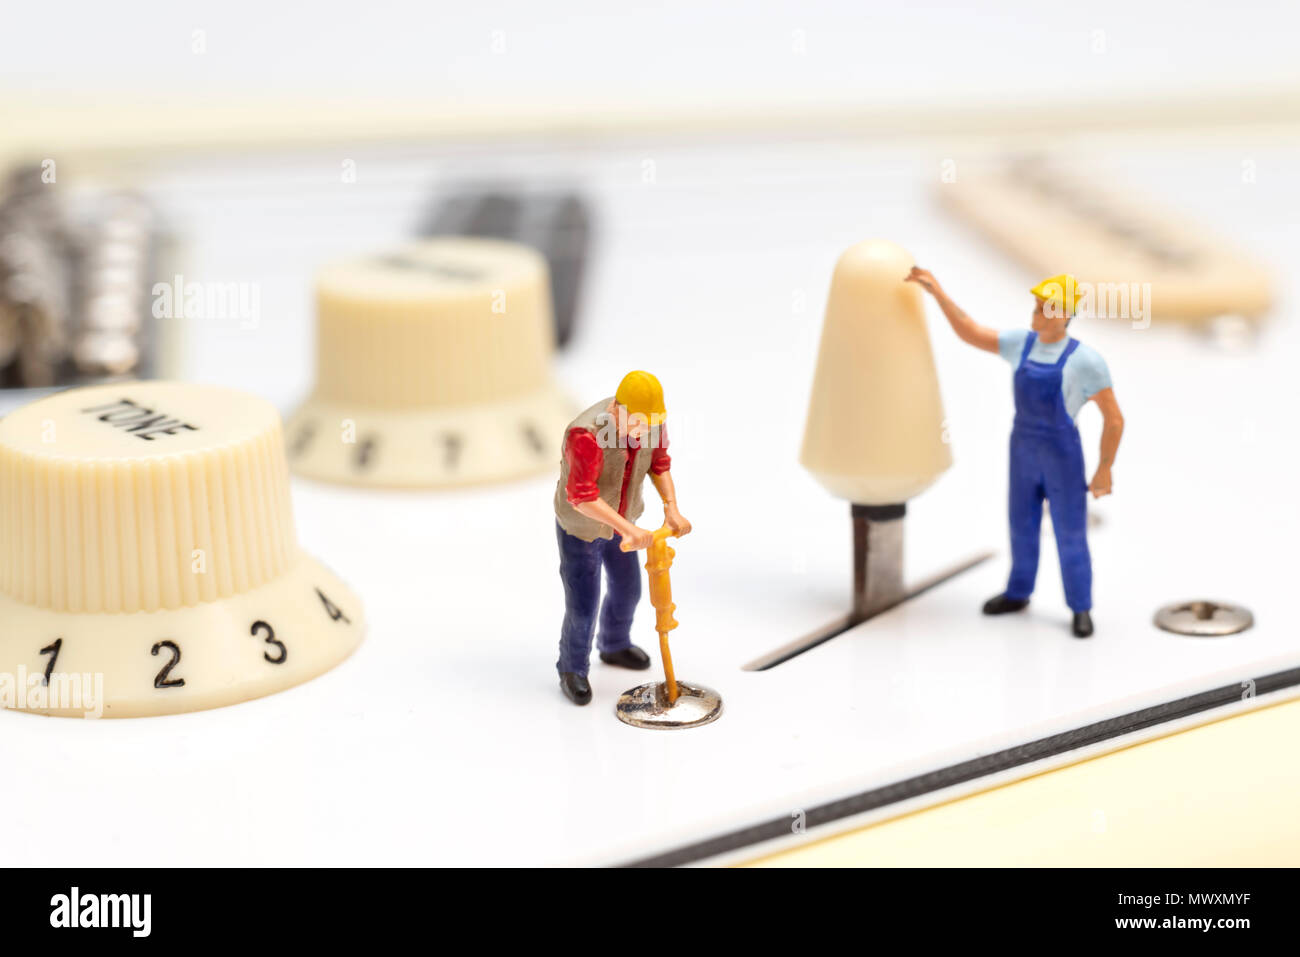 Miniature Workers Fixing The Control Switch Of An Electric Guitar Stock Photo